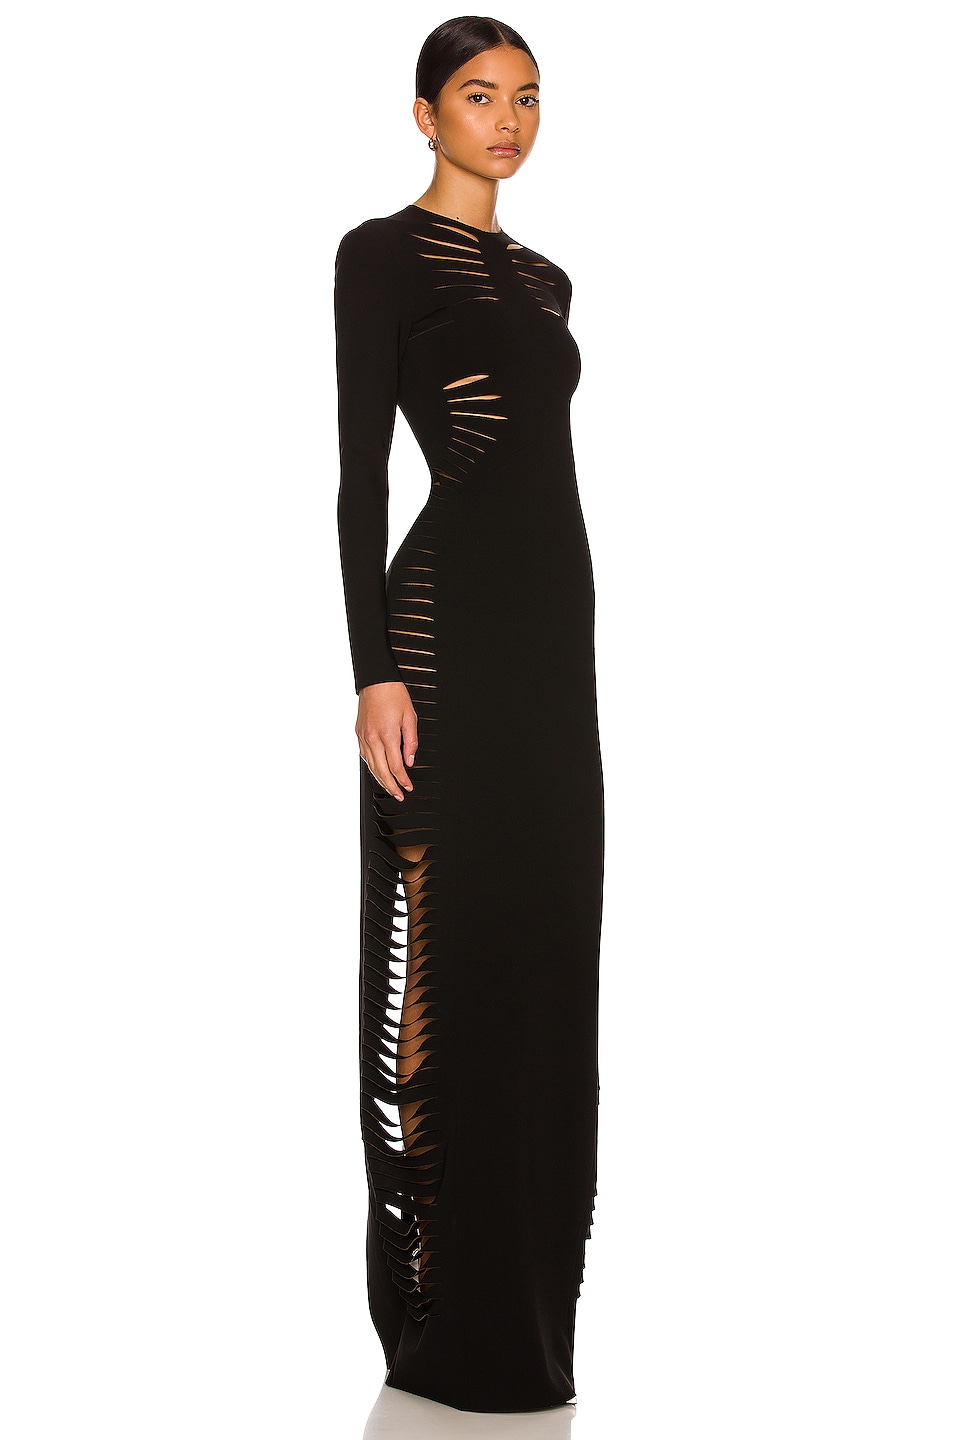 TOM FORD Cut Out Gown in Black | FWRD